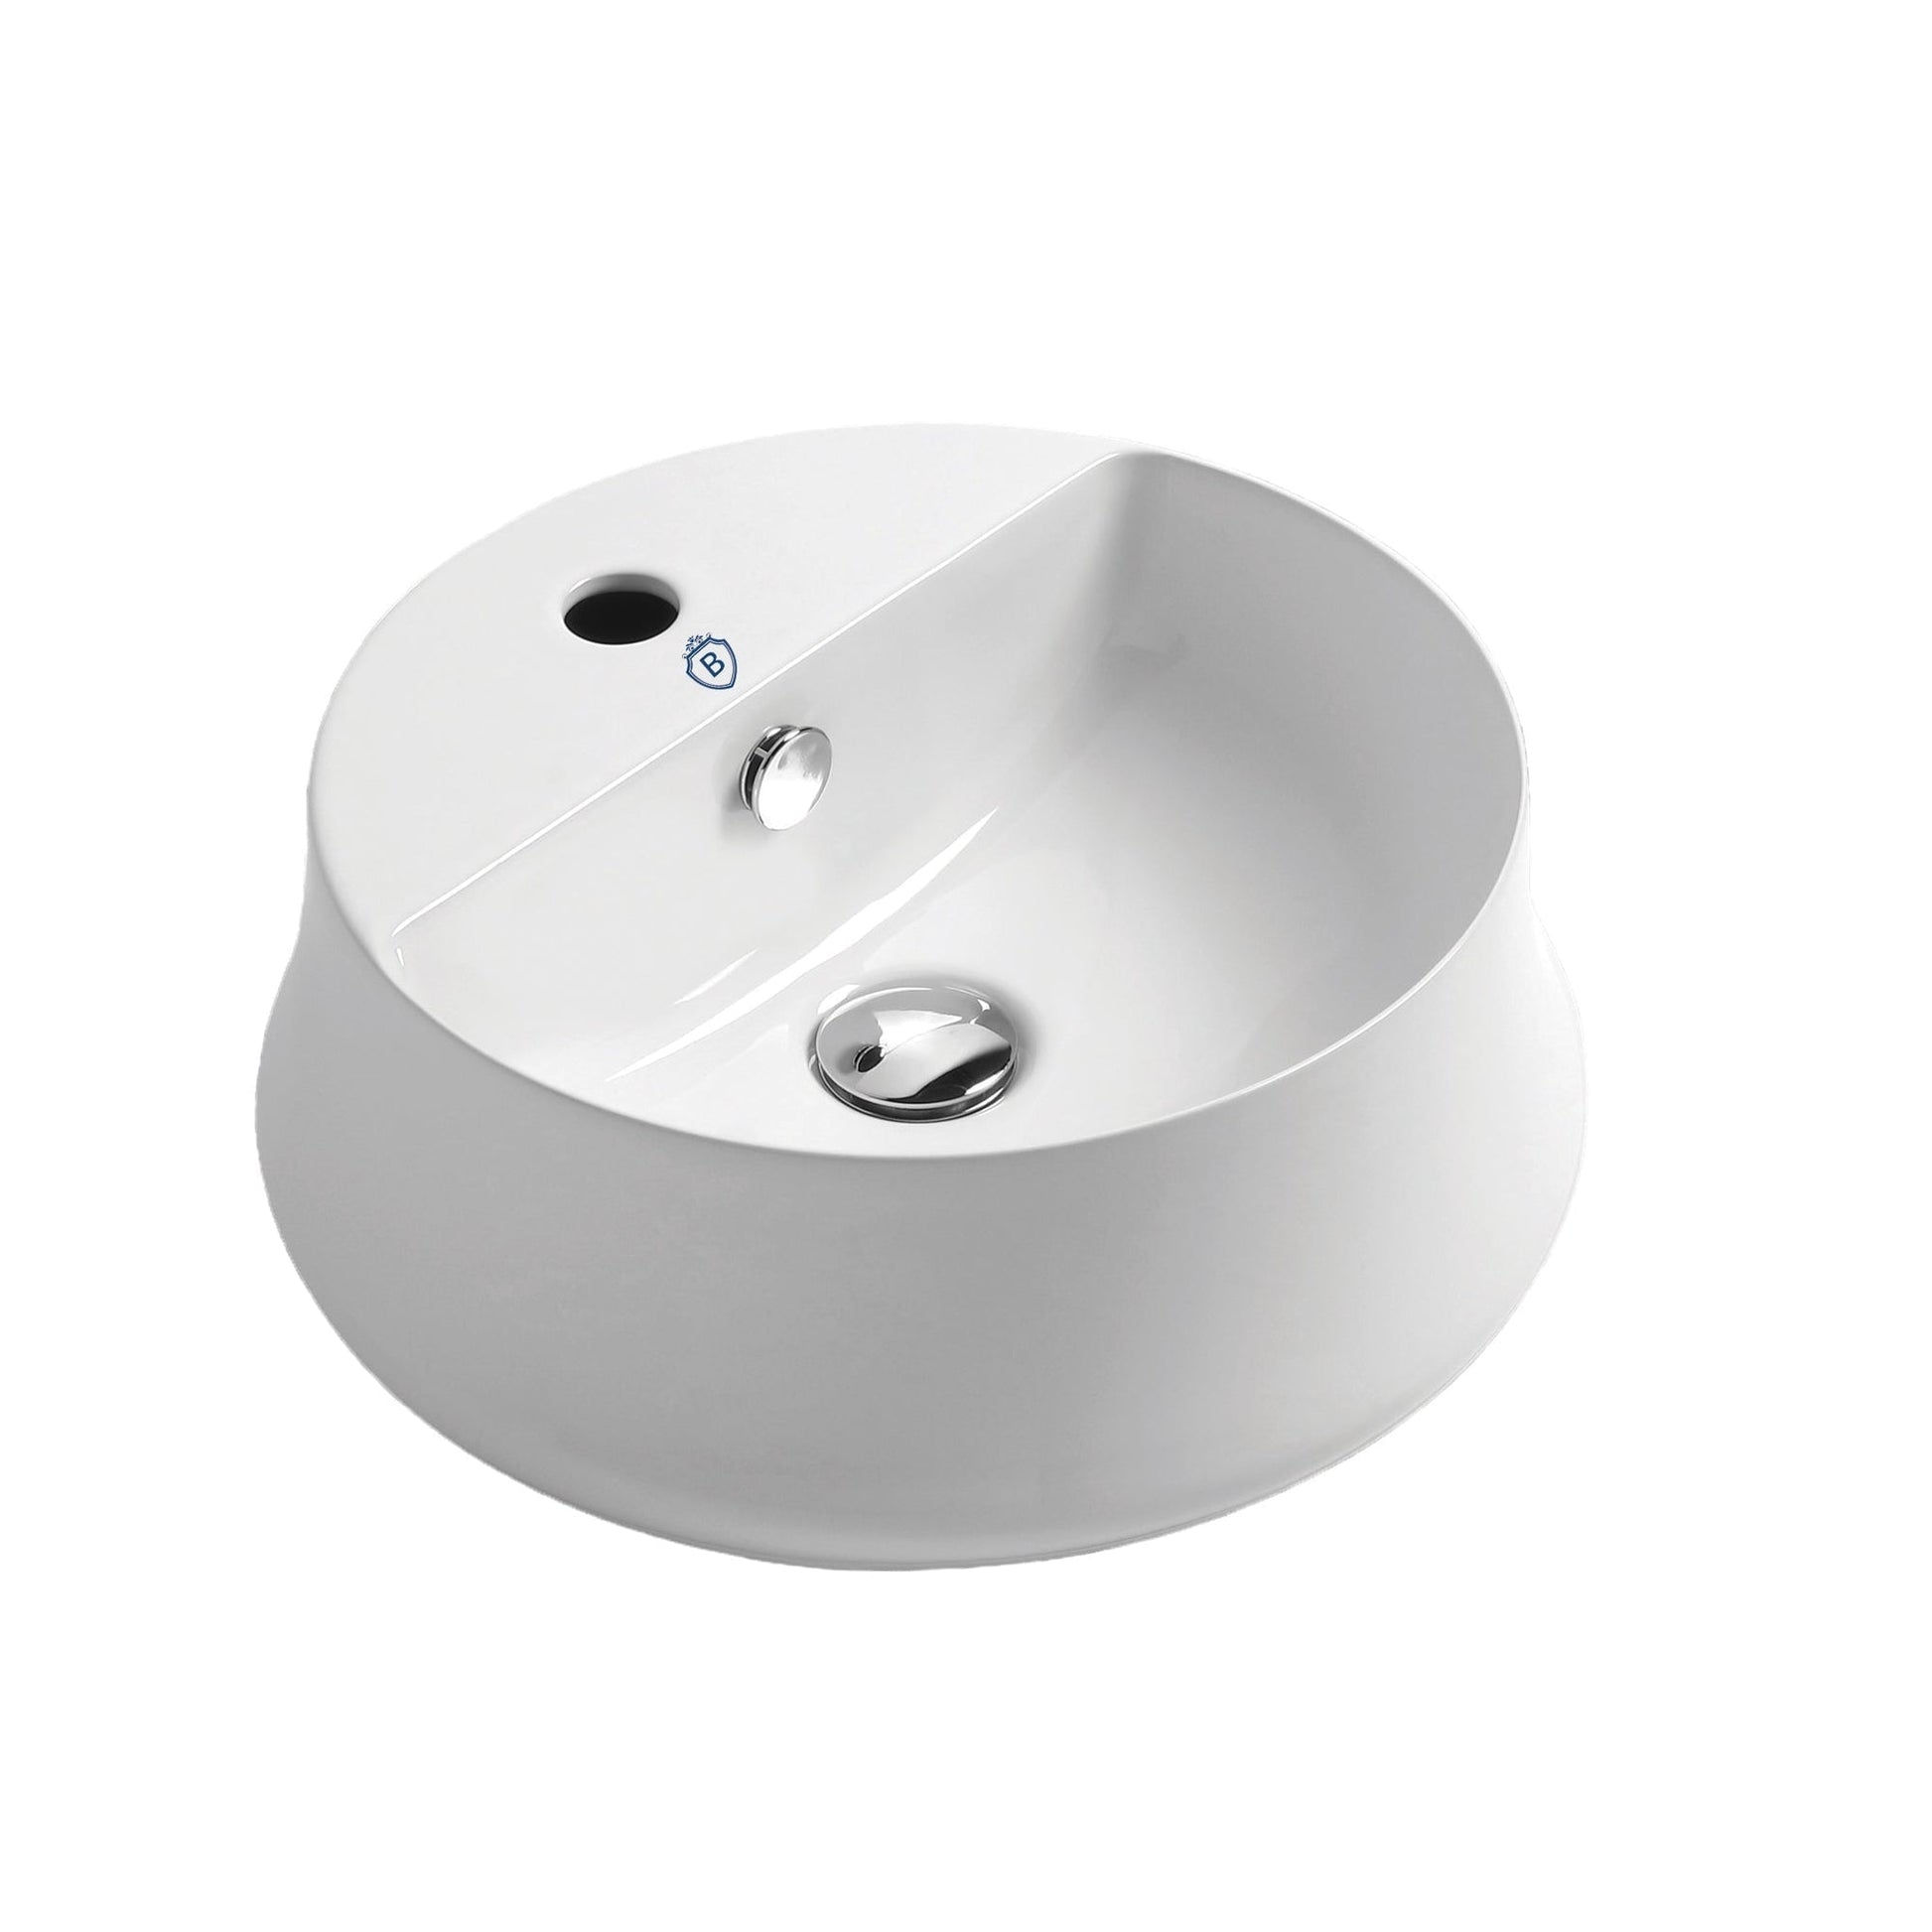 Whitehaus Britannia B-SH03 White Round Above Mount Basin With Single Faucet Hole Drill and Center Drain